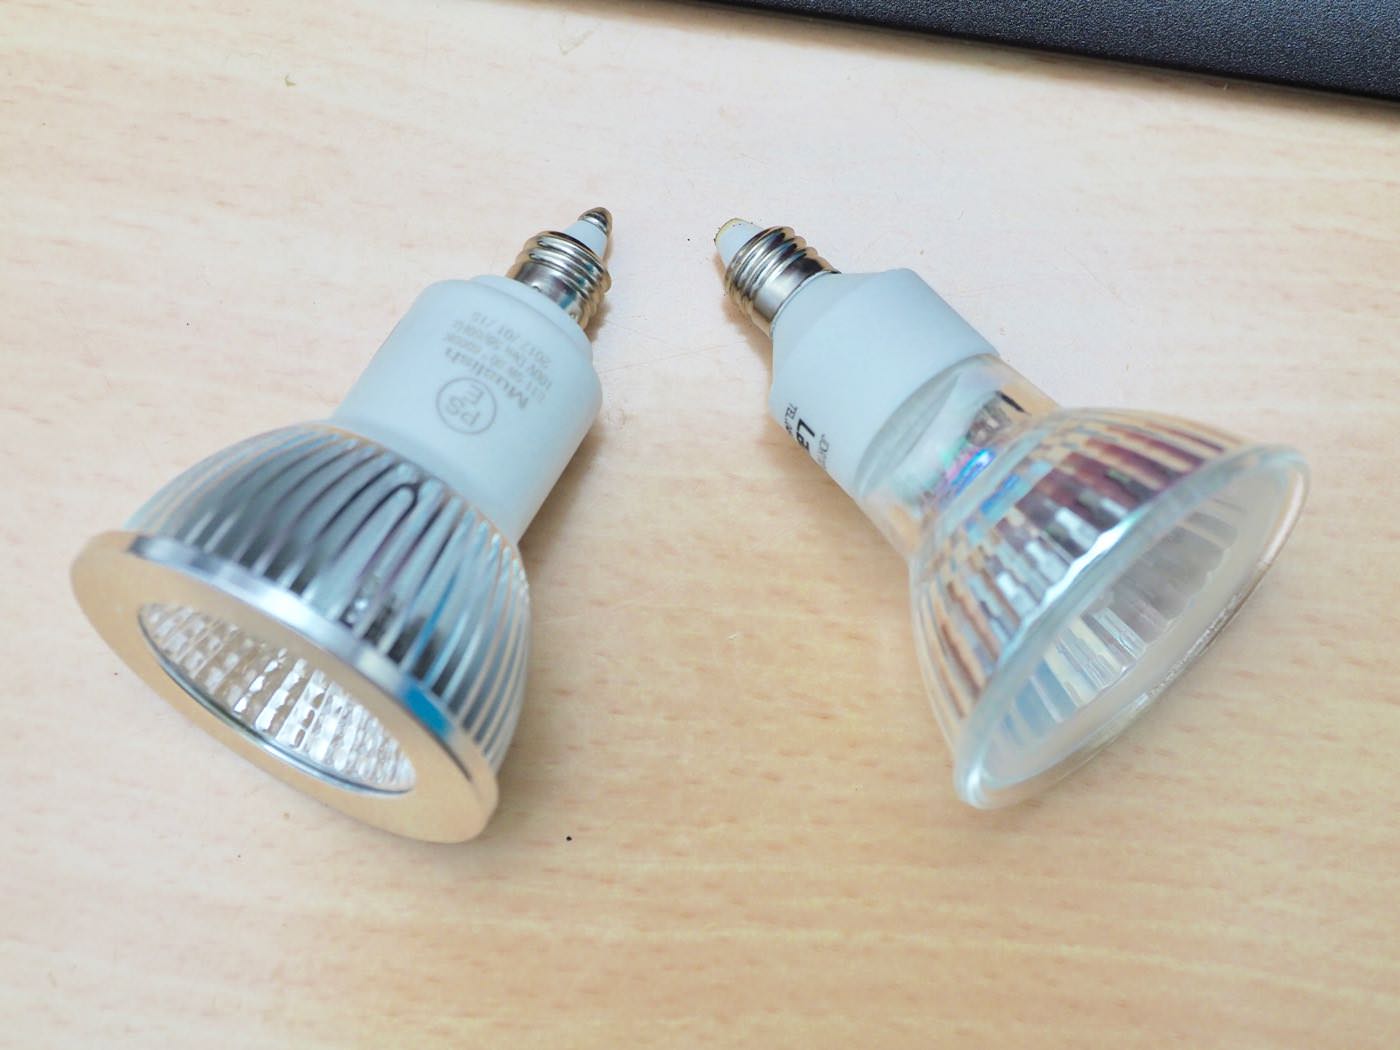 Replacement of halogen lamp with led light 00009